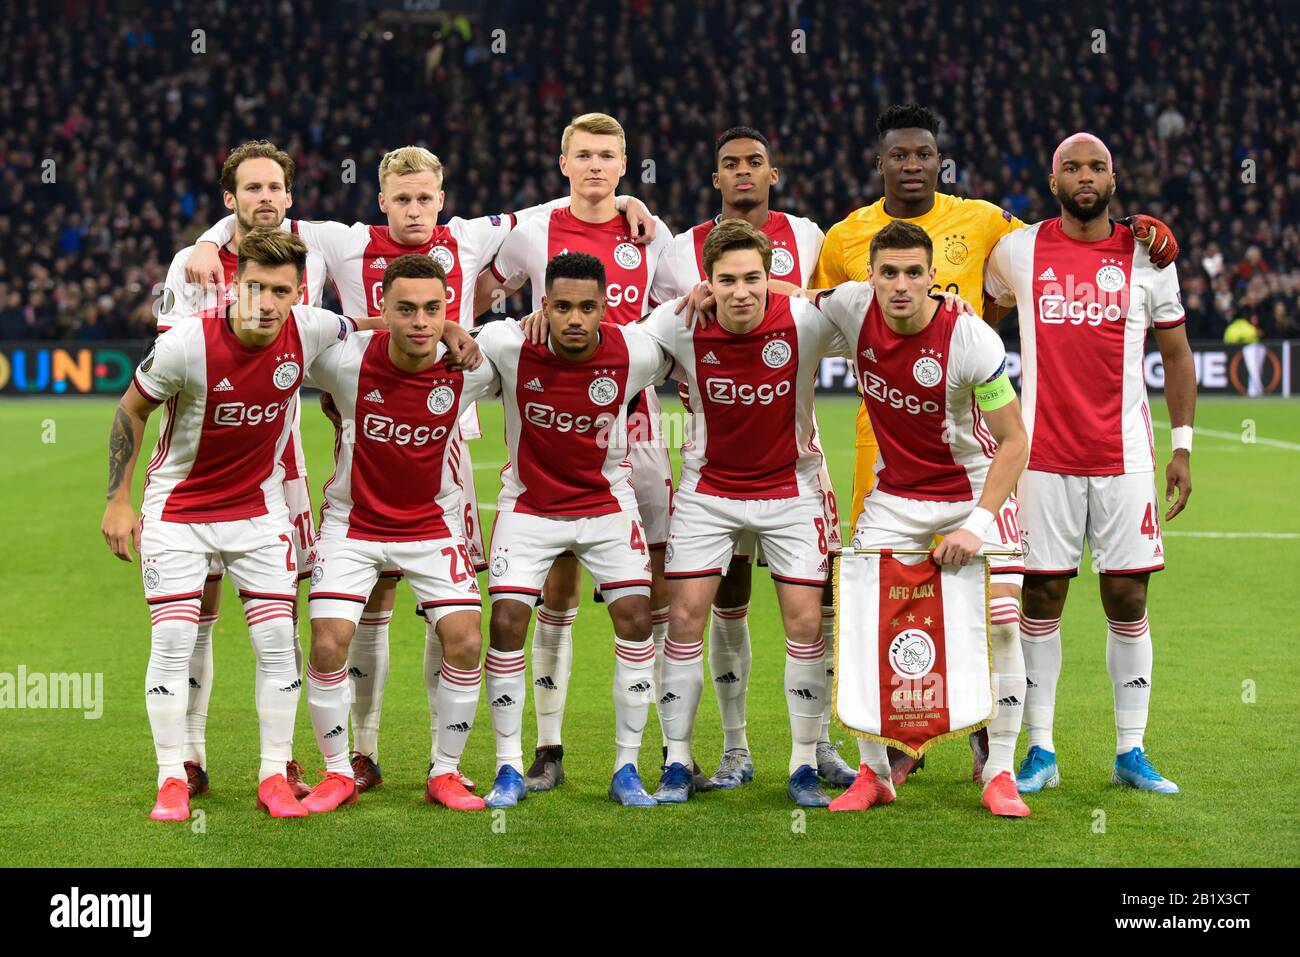 Amsterdam, Netherlands. 27th Feb, 2020. AFC Ajax team poses for a photo  during the Europa League Round of 32 match between AFC Ajax and Getafe C.F.  at Johan Cruijff ArenA in Amsterdam